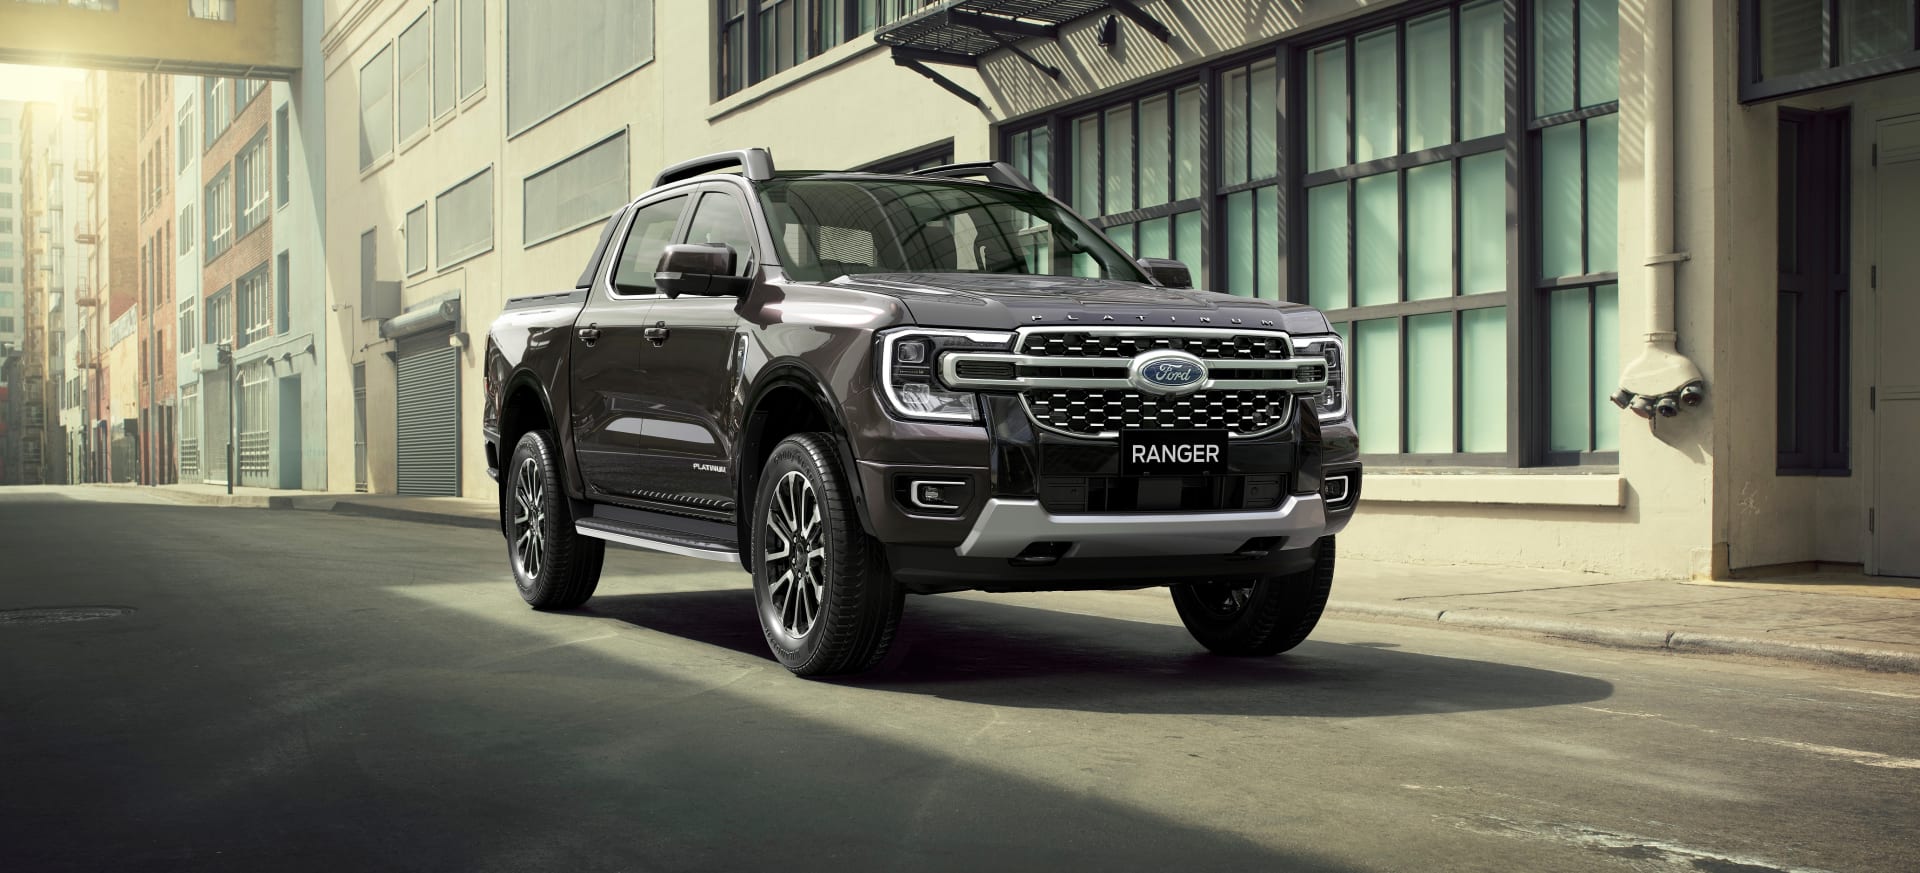 Ford Ranger Platinum - Dominelli Ford Kirrawee Sutherland Shire Sydney South